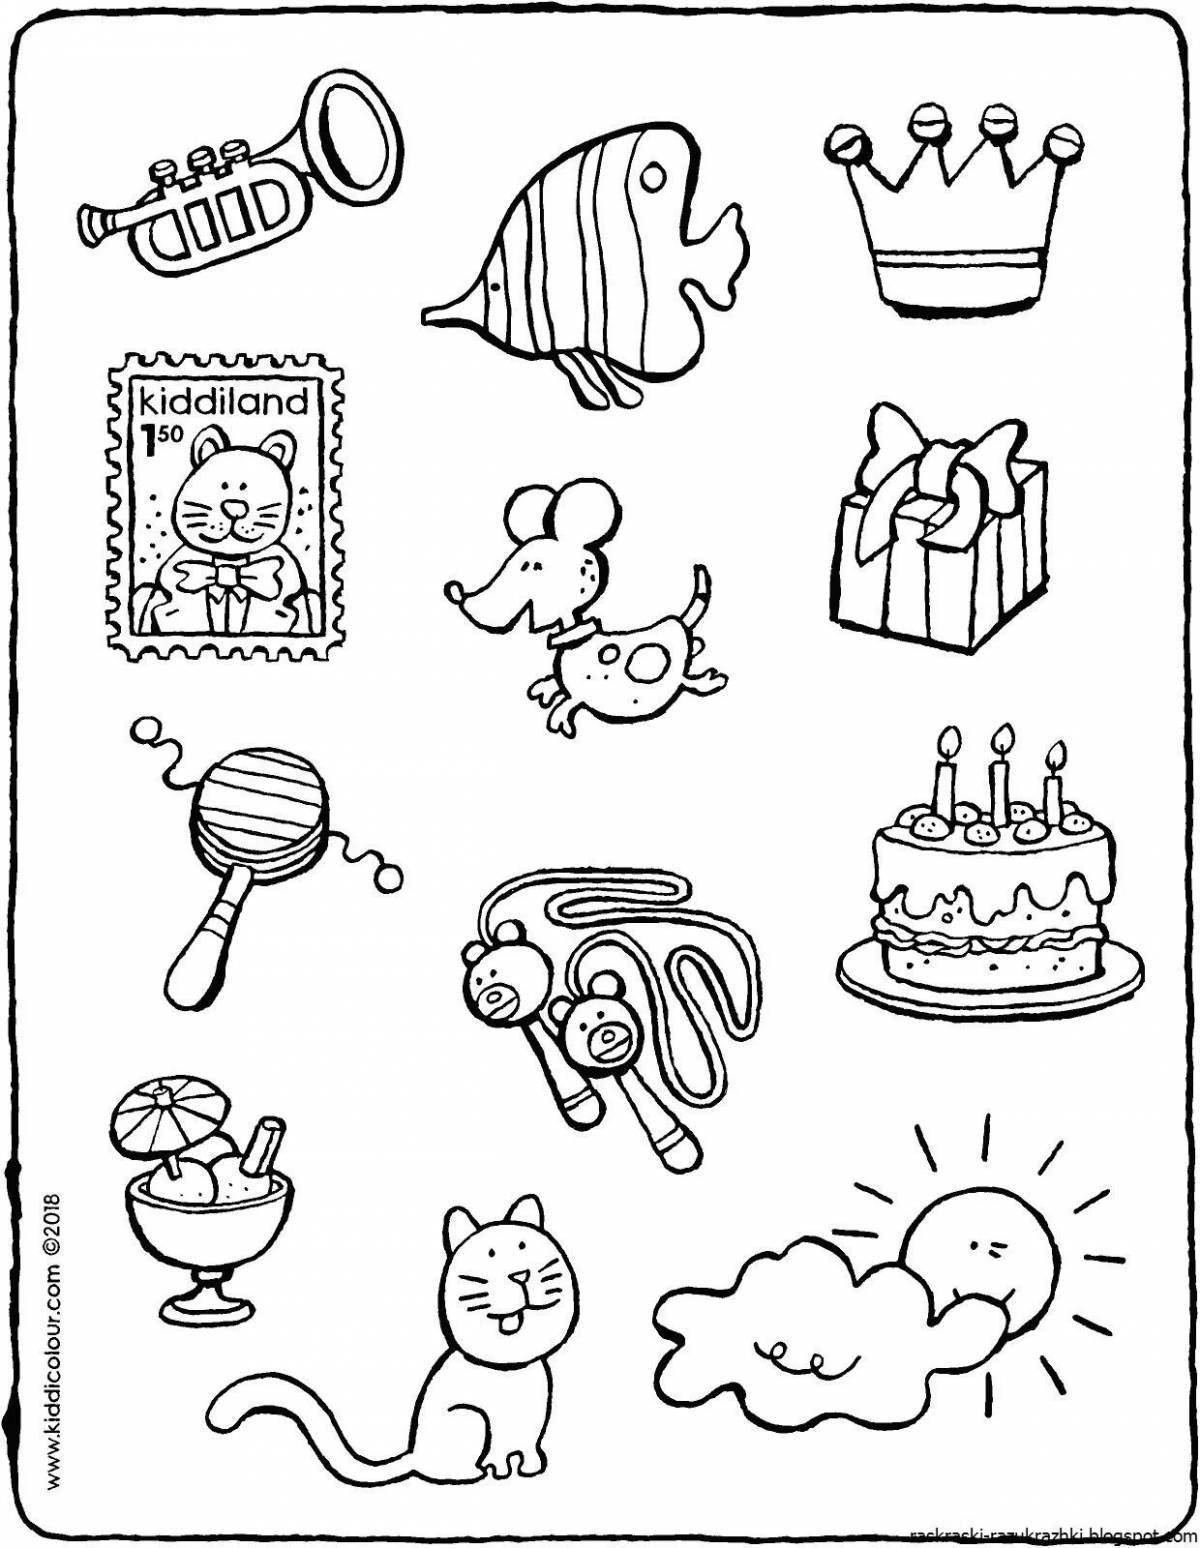 Amazing coloring pages for stickers